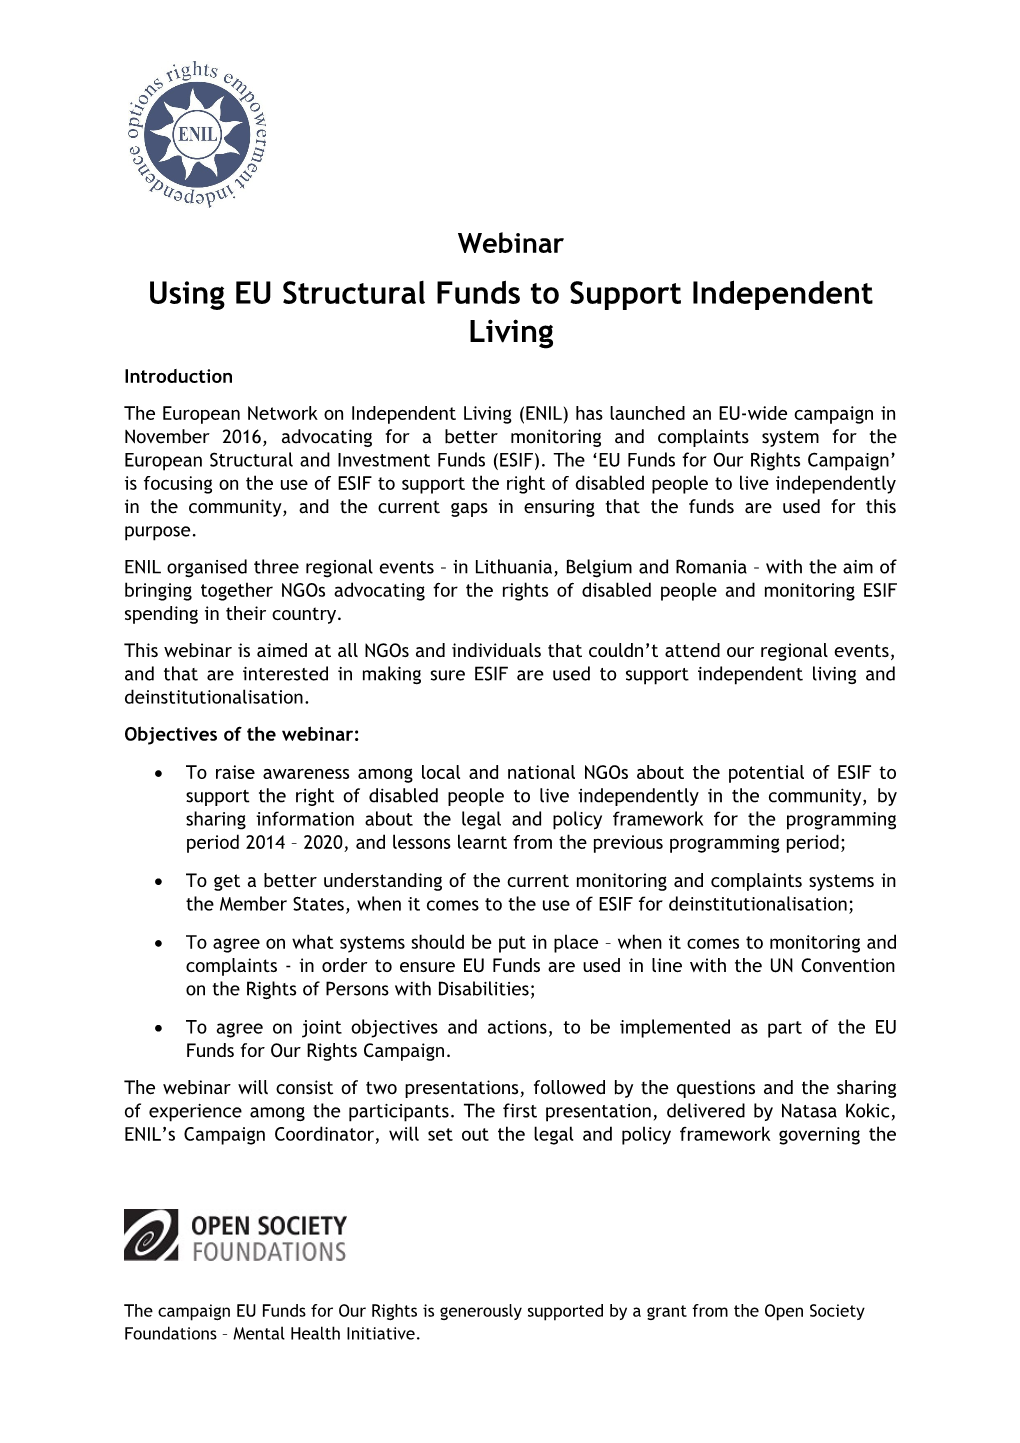 Using EU Structural Funds to Support Independent Living